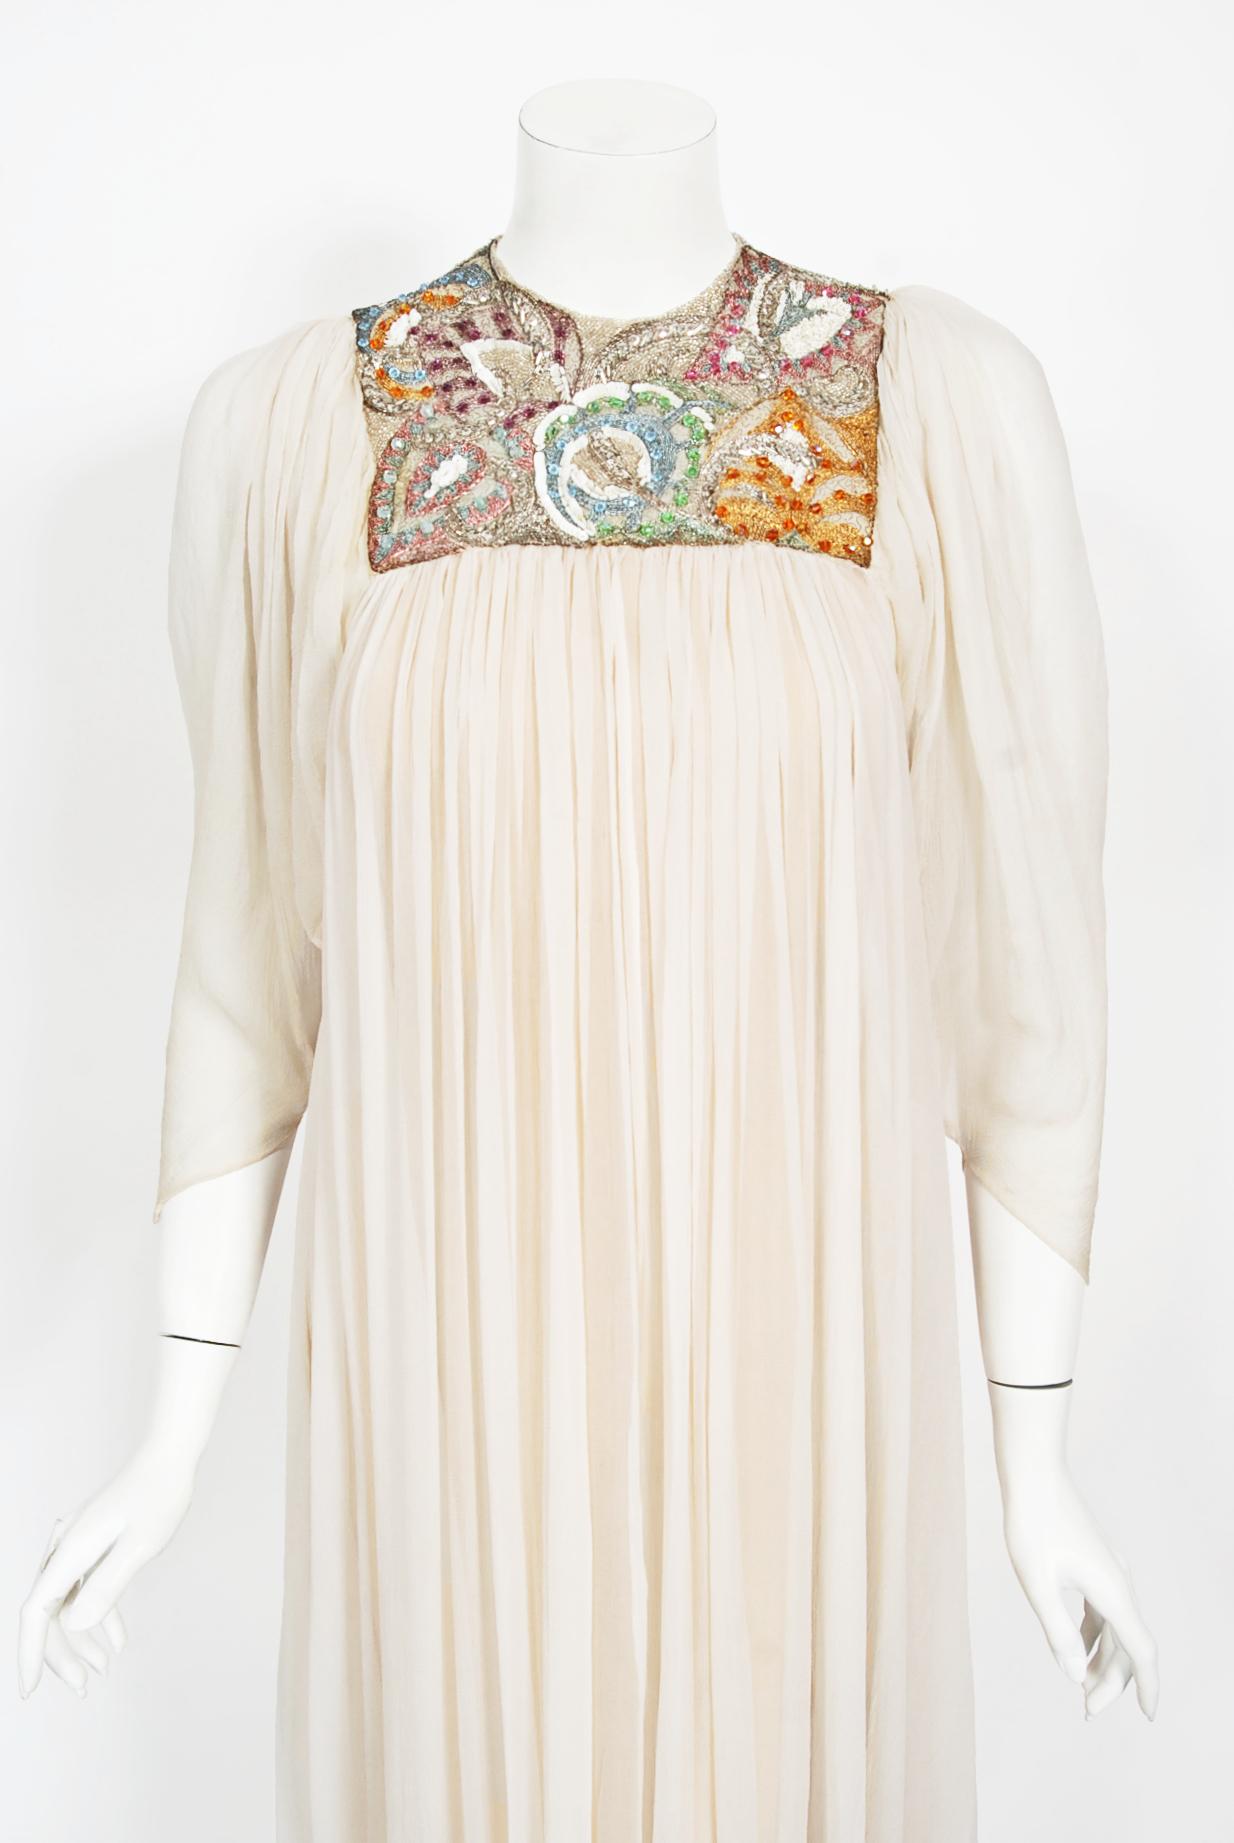 An unforgettable and incredibly rare Madame Grès haute couture ivory silk goddess bridal gown dating back to the mid 1970's. This ethereal look was also lavishly embellished by Lesage; a French embroidery house globally known as the best in the